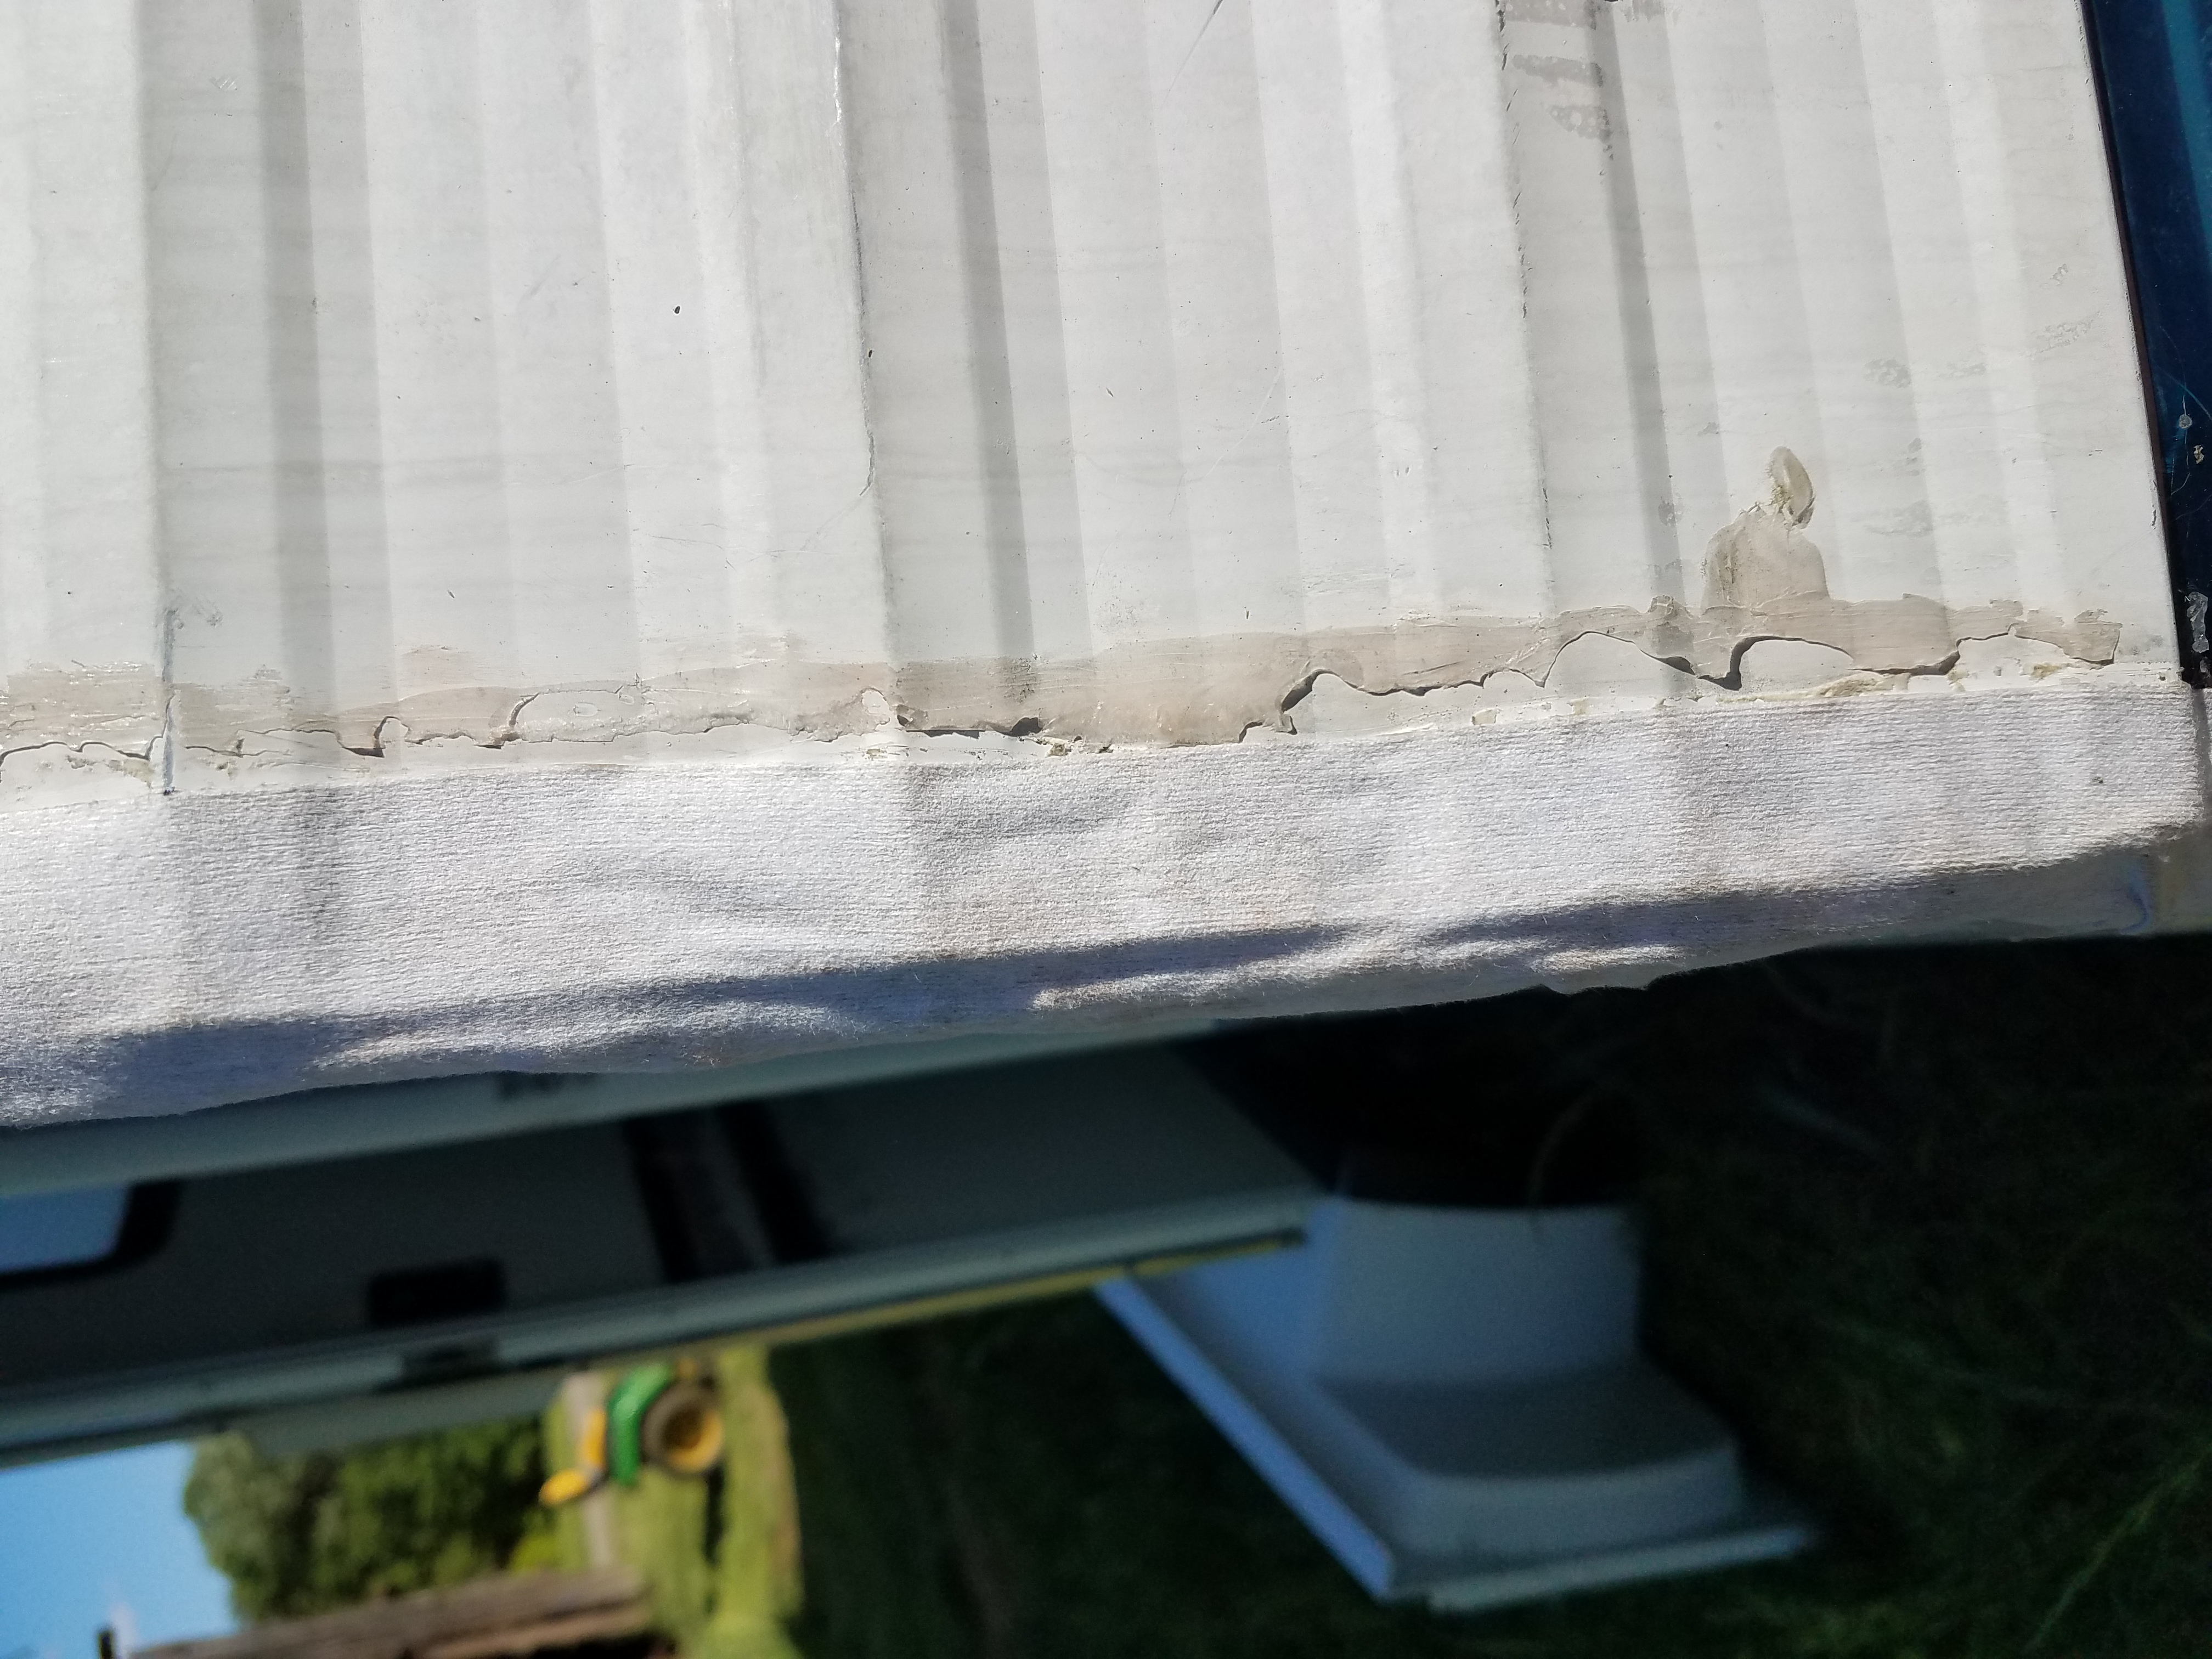 The corner of the travel trailer sealed with seam tape before being properly sealed.